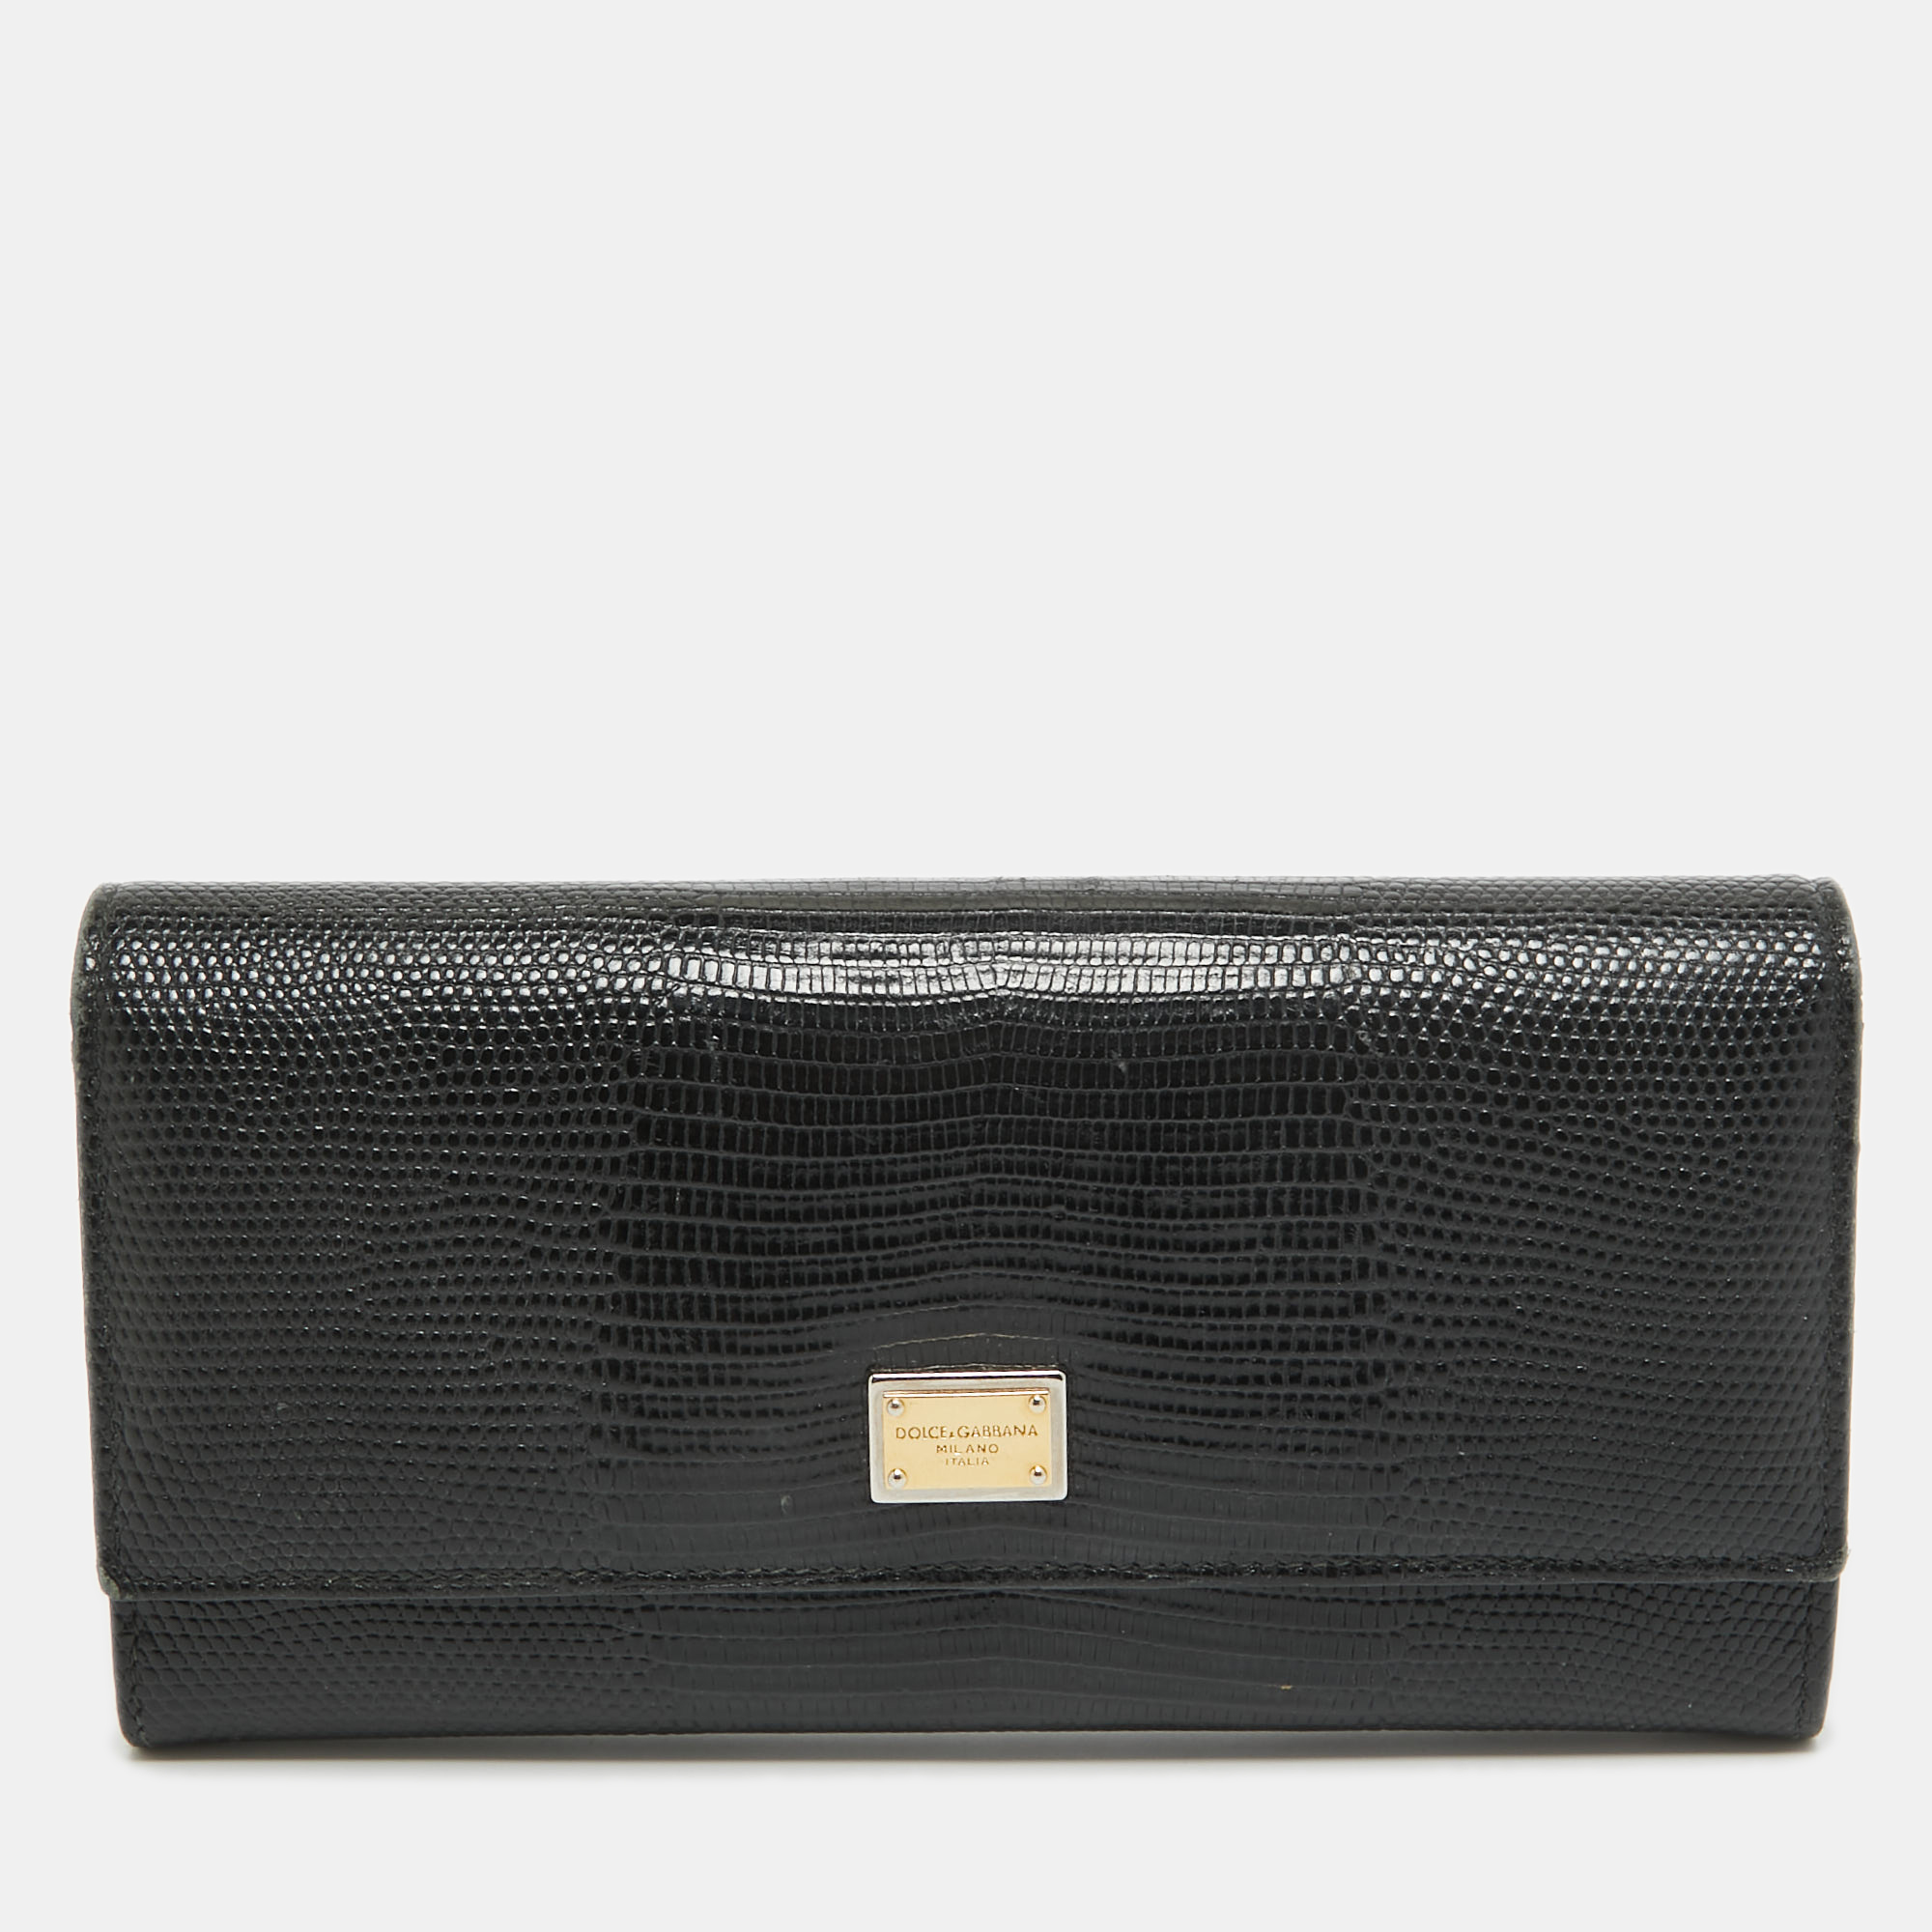 

Dolce & Gabbana Black Lizard Embossed Leather Flap Continental Wallet